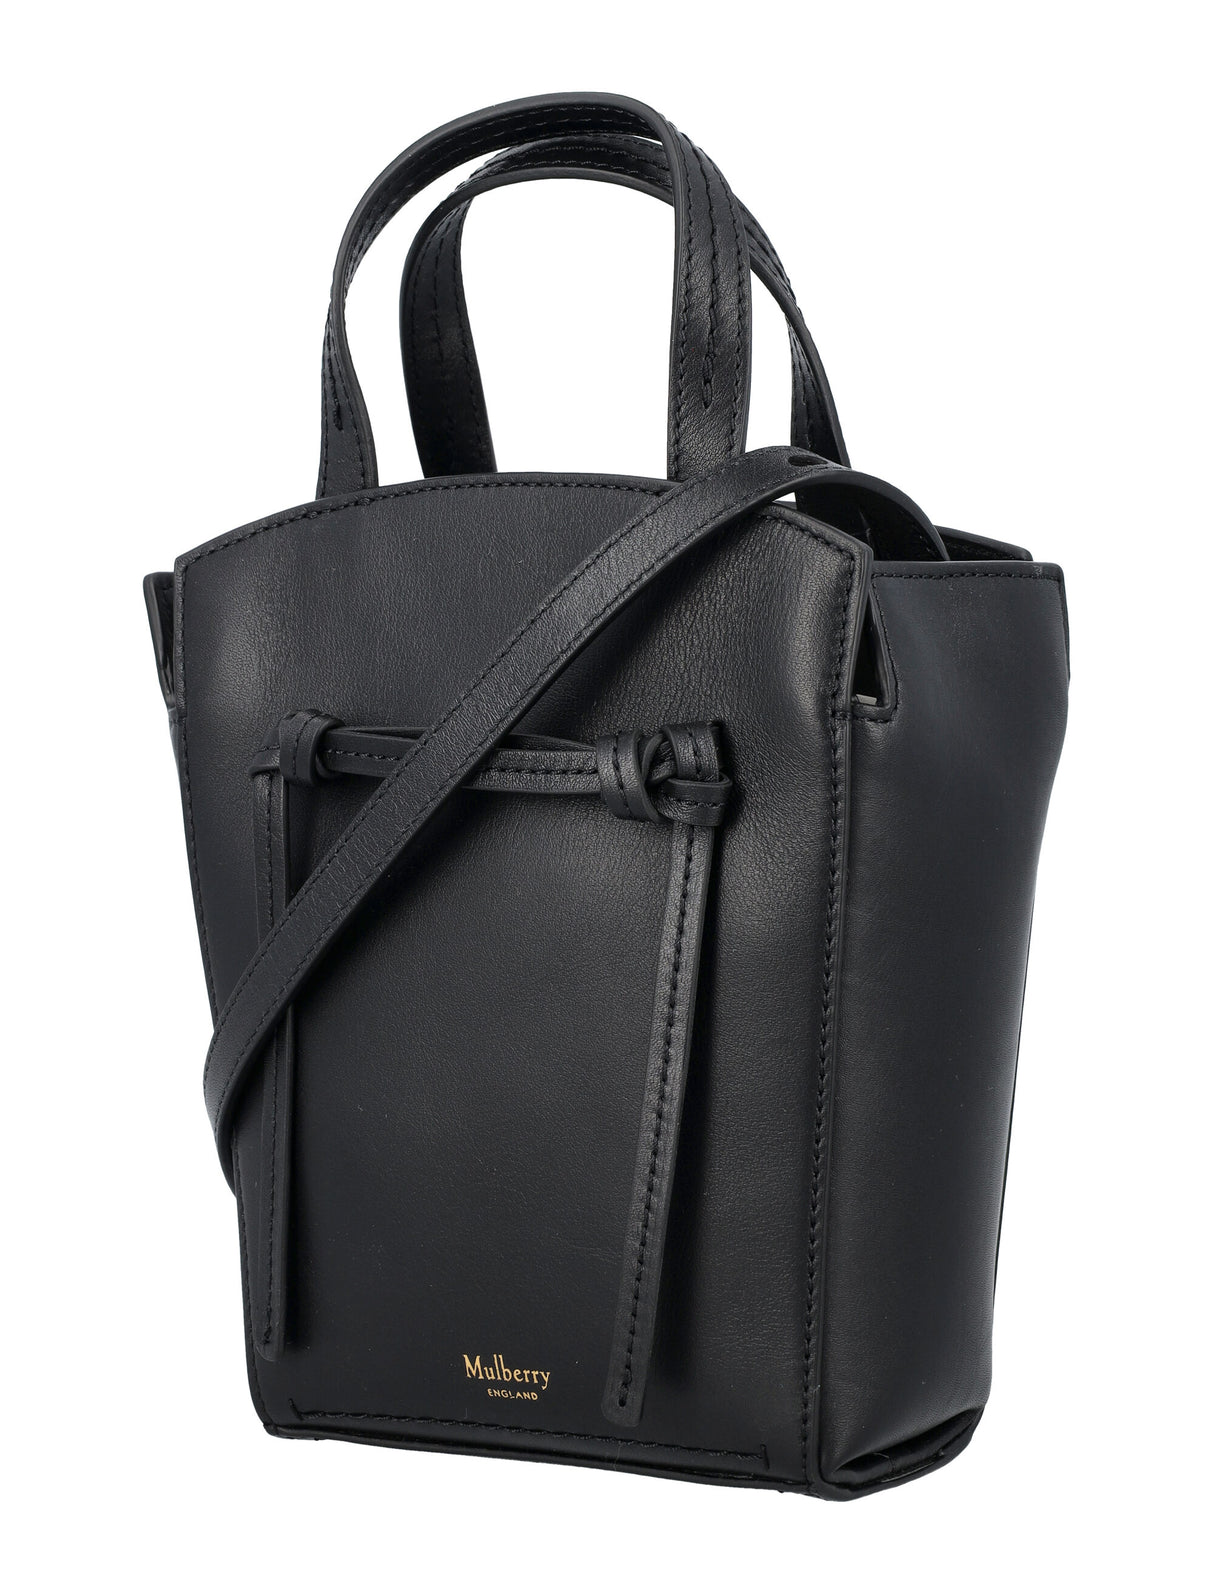 MULBERRY Black Mini Leather Tote Handbag with Detachable Strap and Microsuede Lining - 18cm